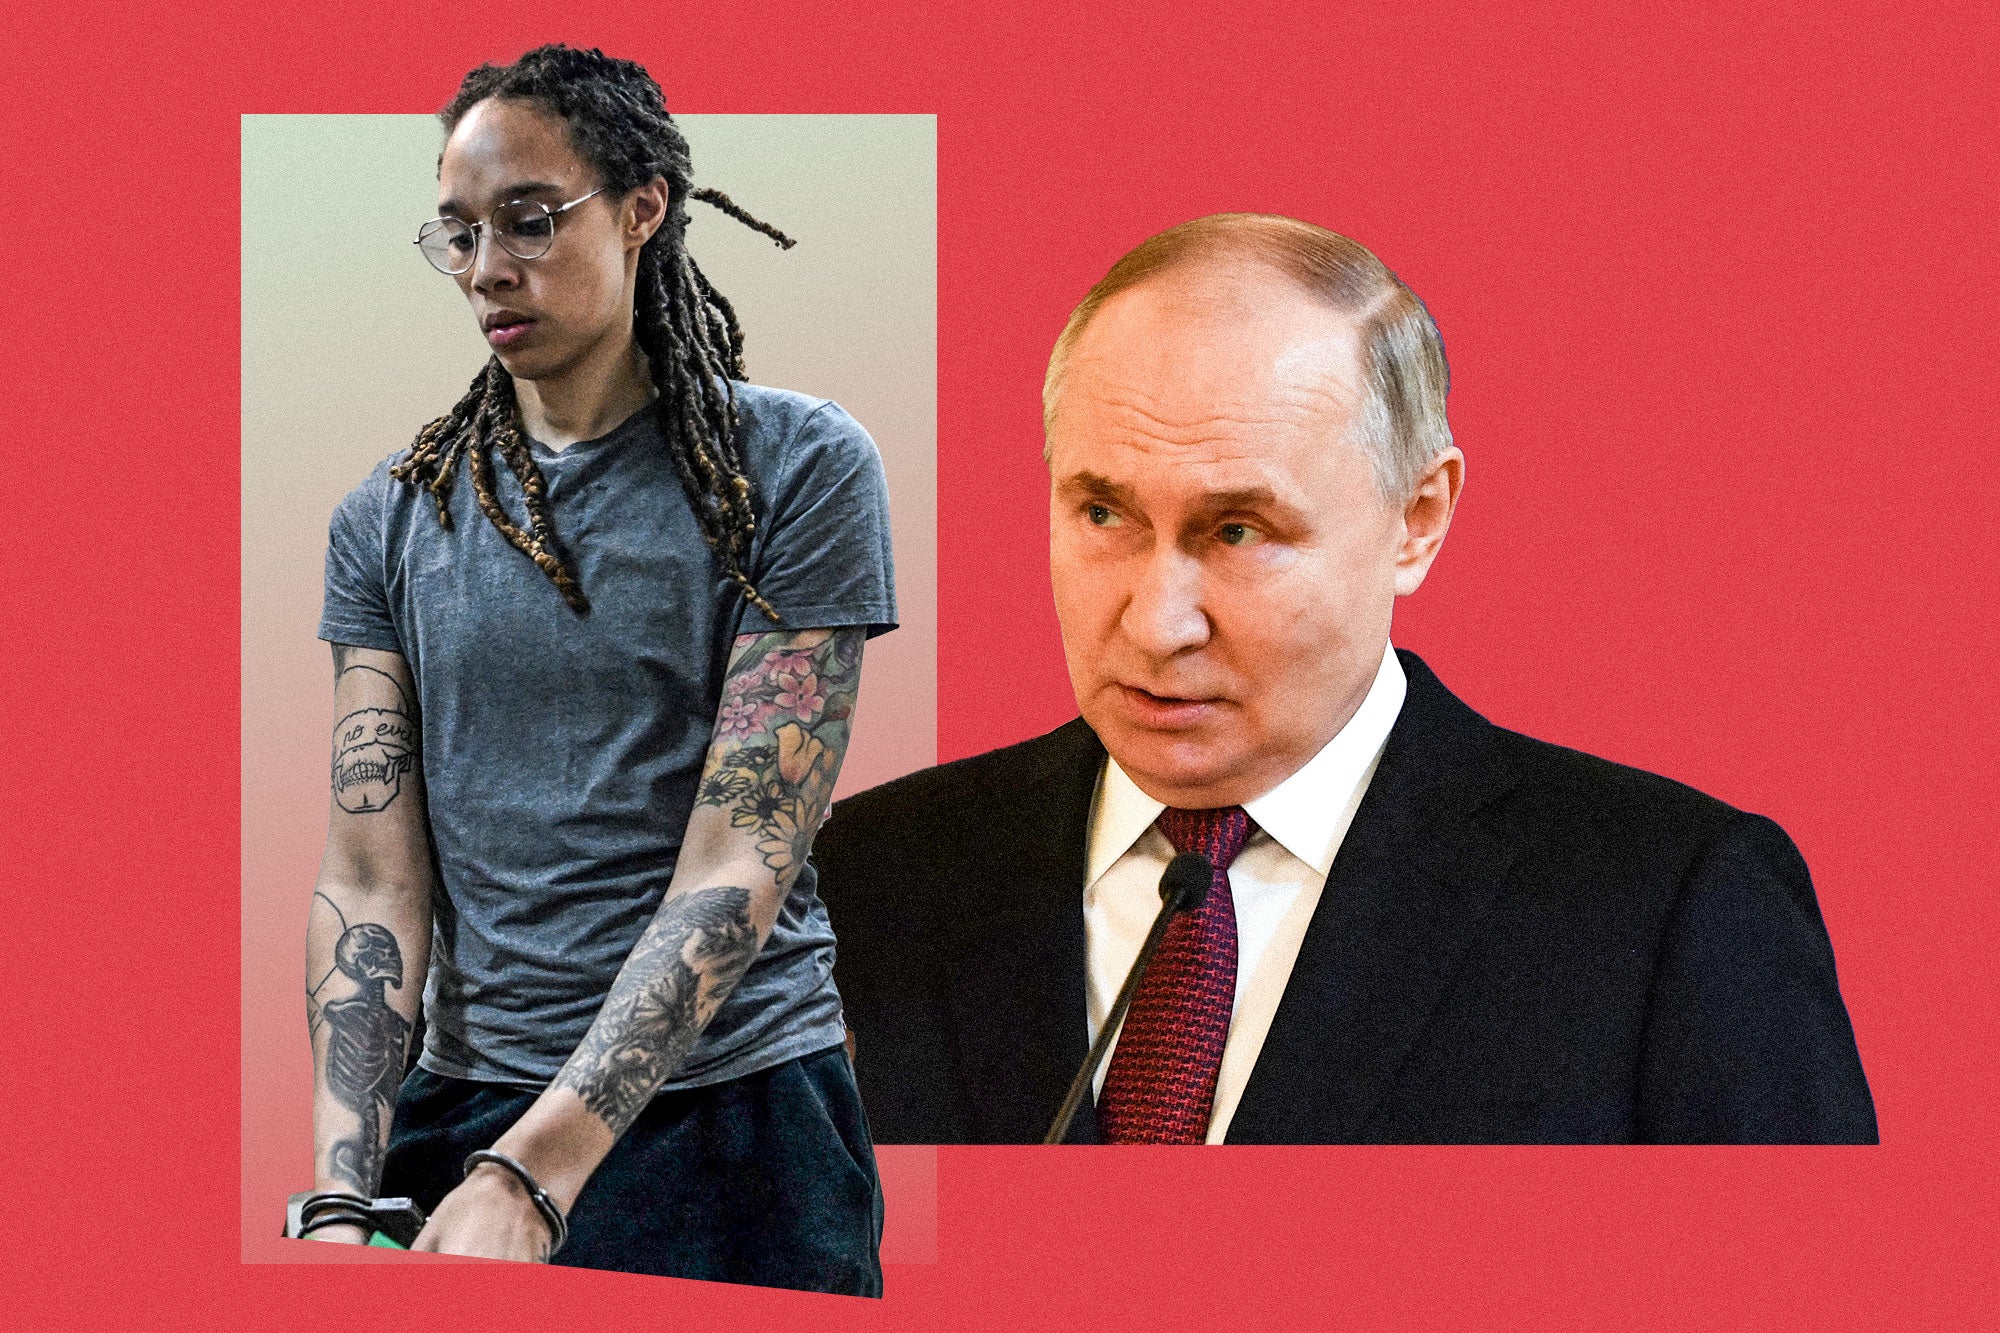 Brittney Griner in handcuffs on the left and Vladimir Putin on the right.